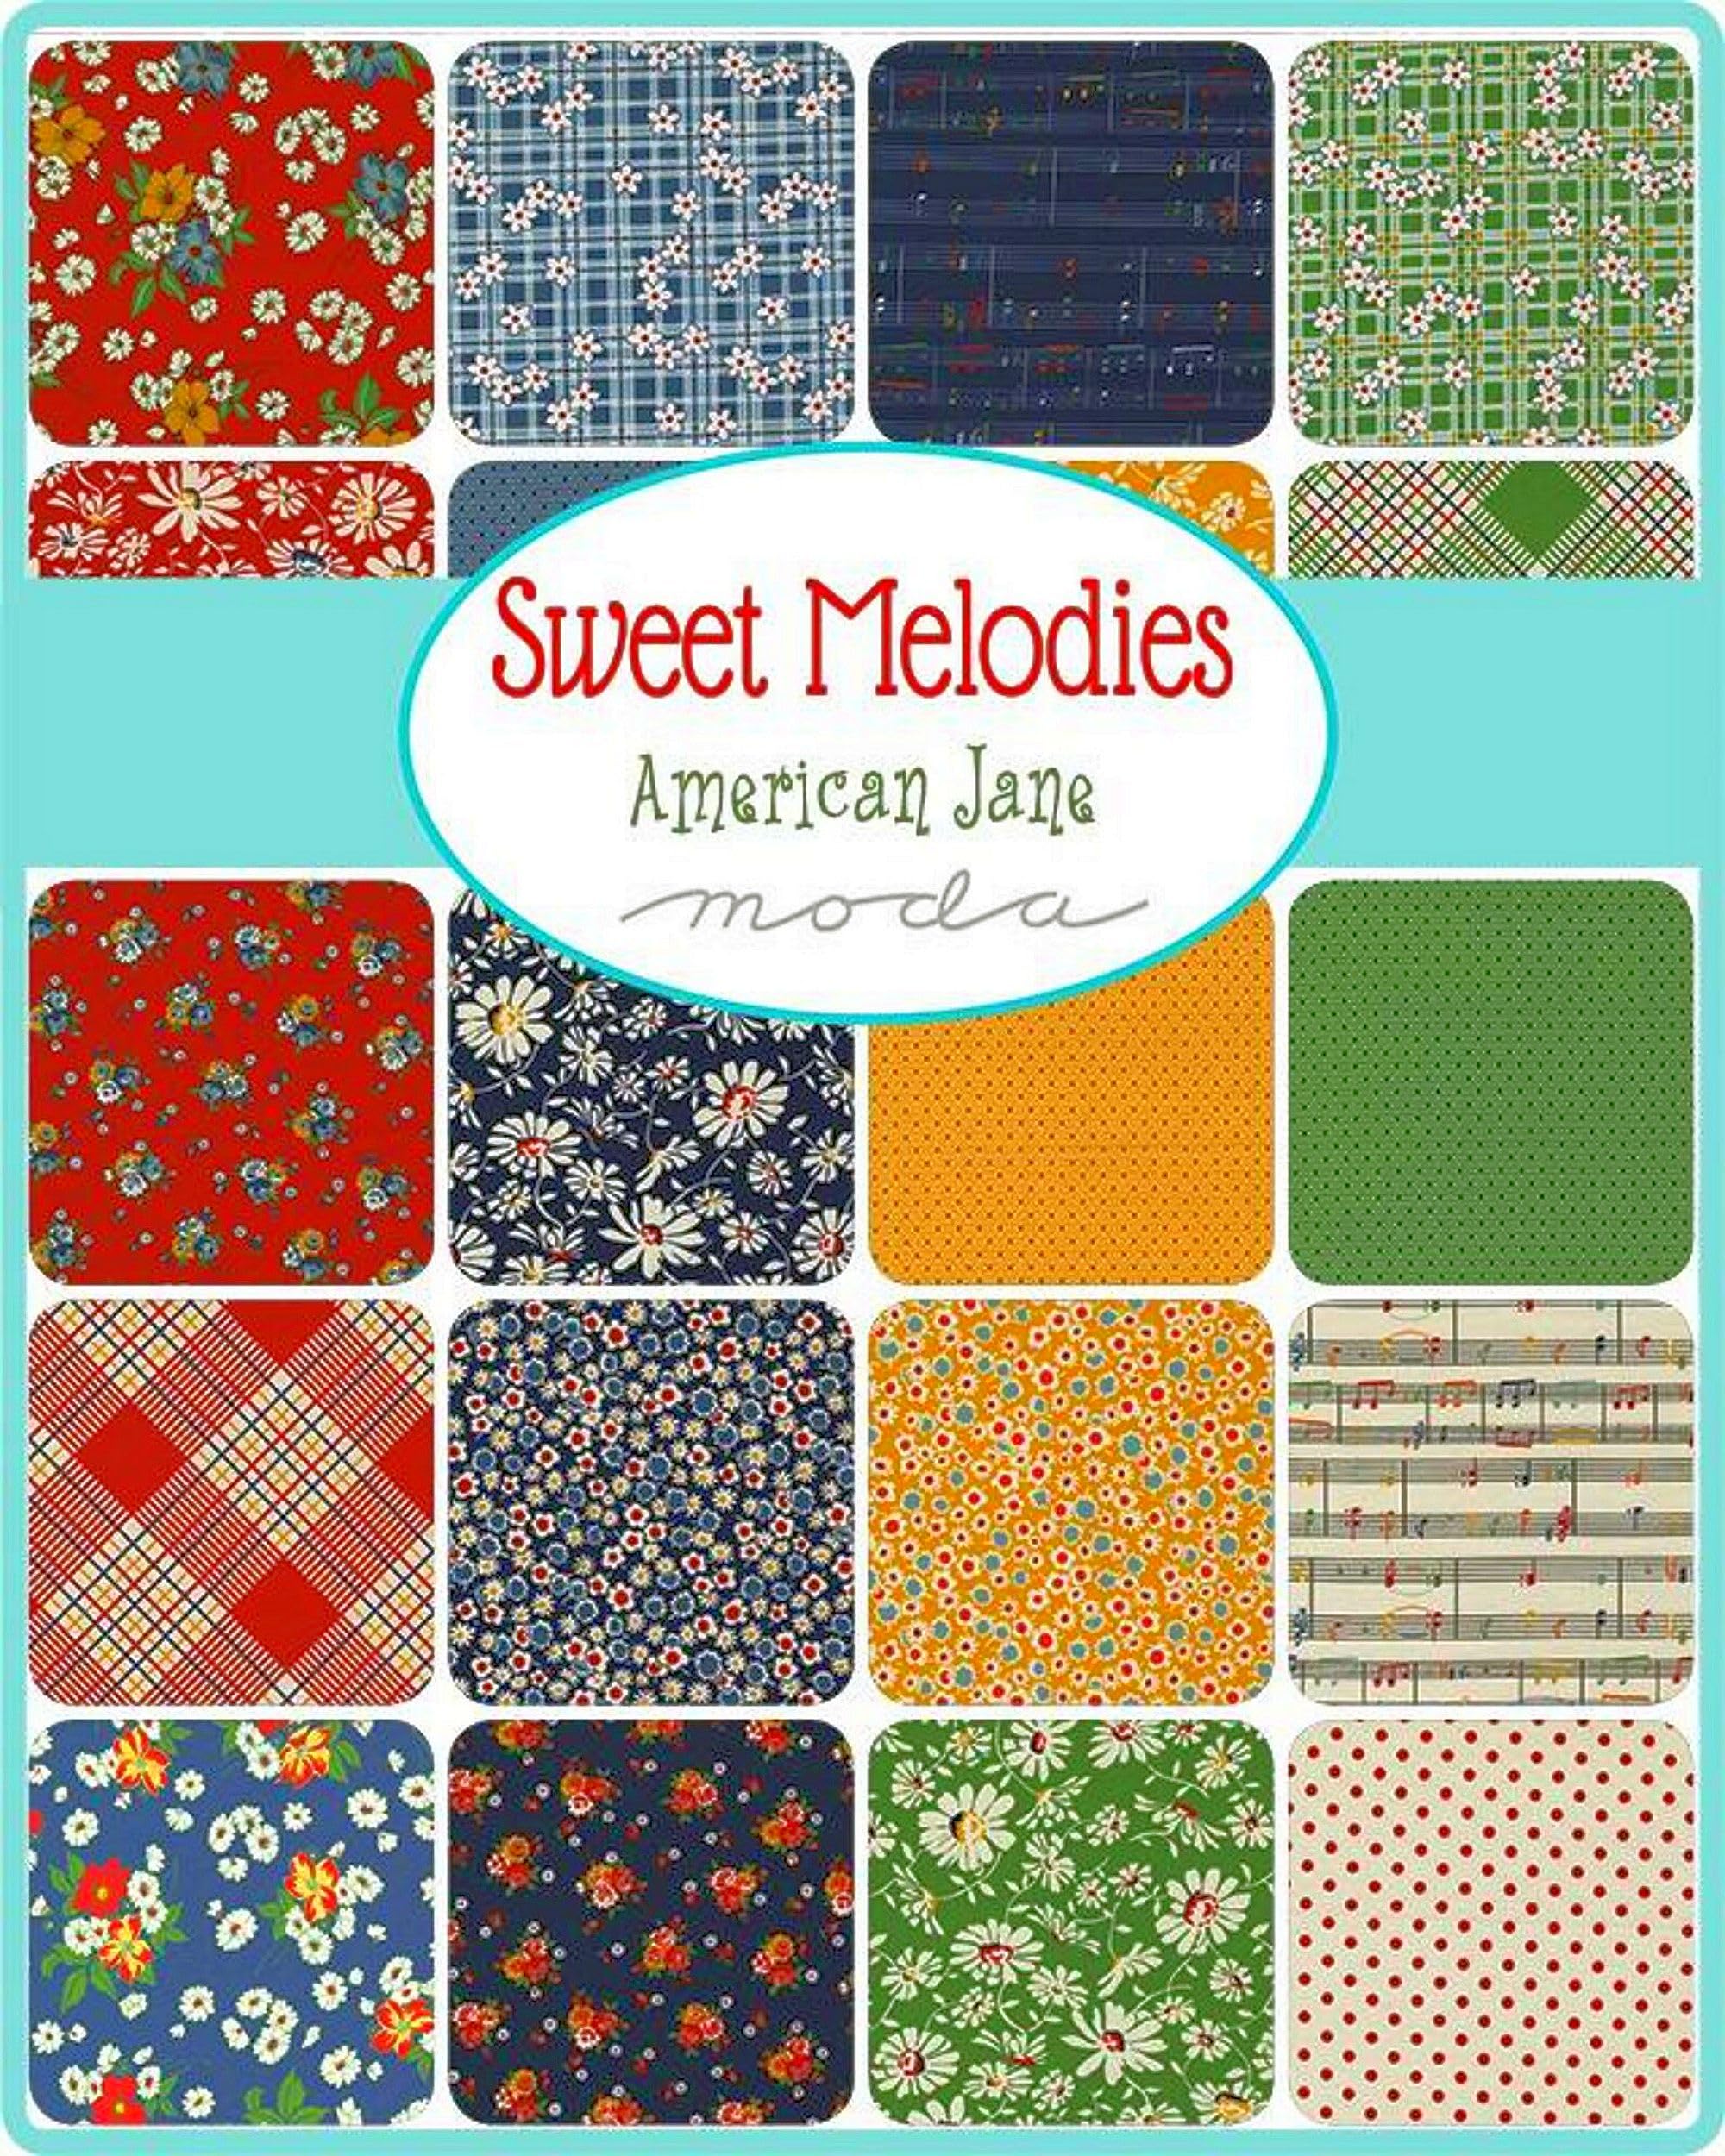 Sweet Melodies Jelly Roll 21810JR by American Jane from Moda by The roll